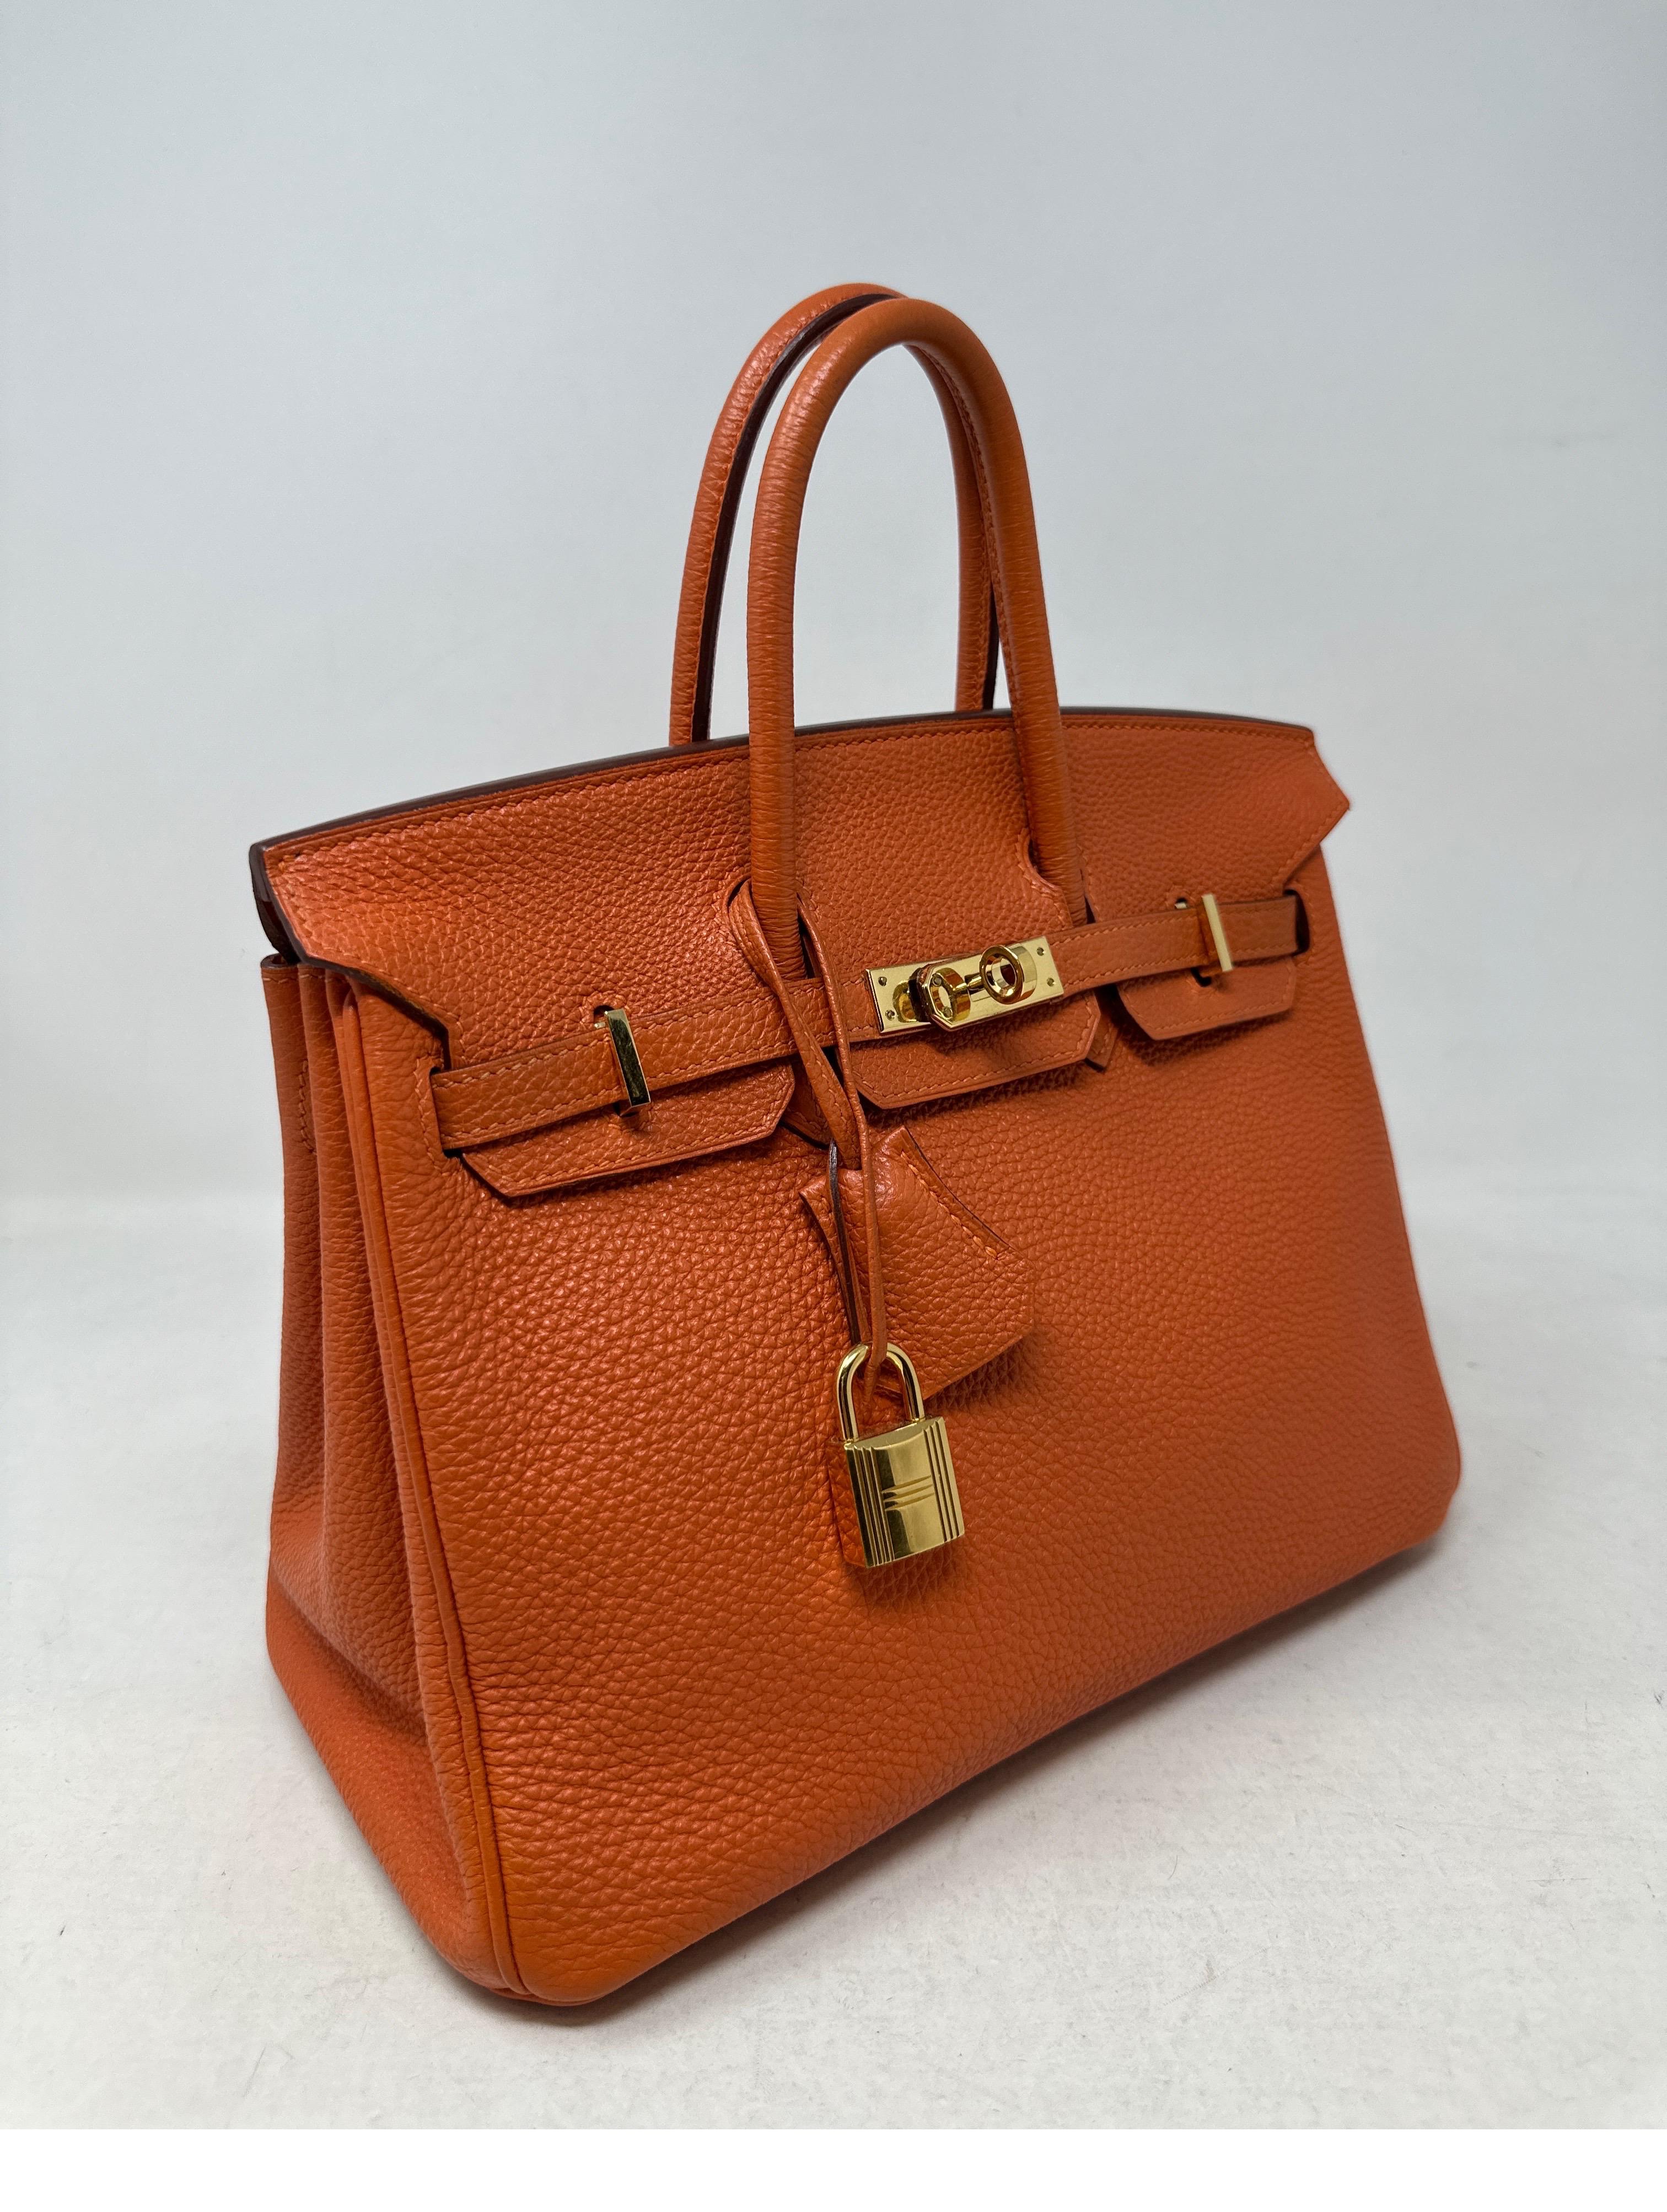 Hermes Orange Birkin 25 Bag. Togo leather. Gold hardware. Mini Birkin is so rare now. Interior is clean. Good condition. Includes clcohette, lock, keys, and dust bag. Guaranteed authentic. 